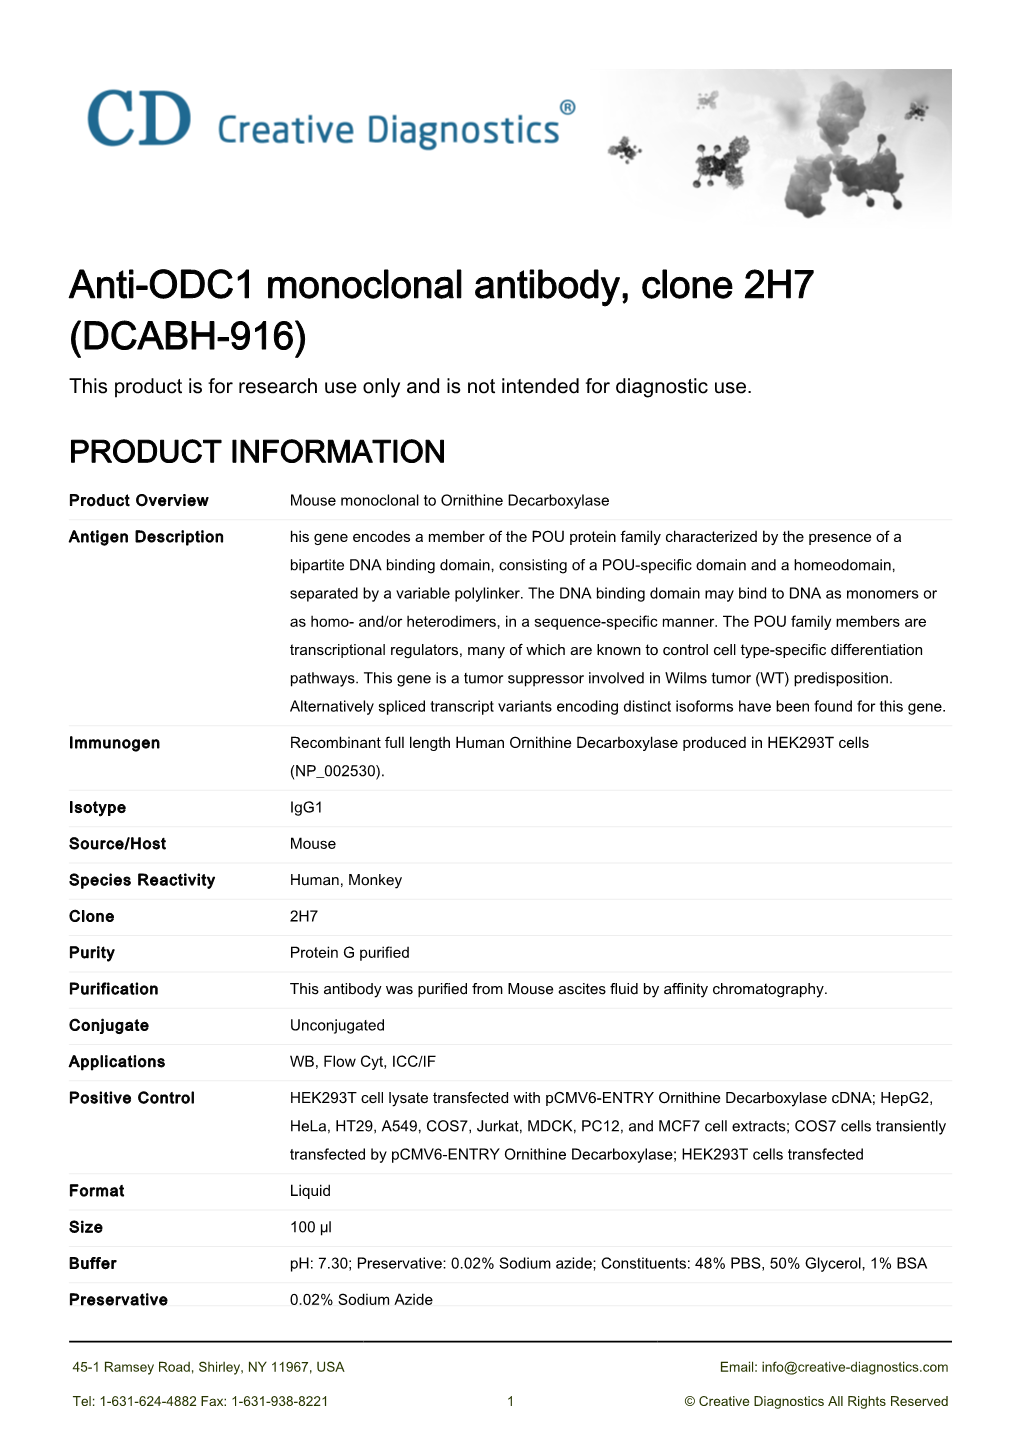 Anti-ODC1 Monoclonal Antibody, Clone 2H7 (DCABH-916) This Product Is for Research Use Only and Is Not Intended for Diagnostic Use